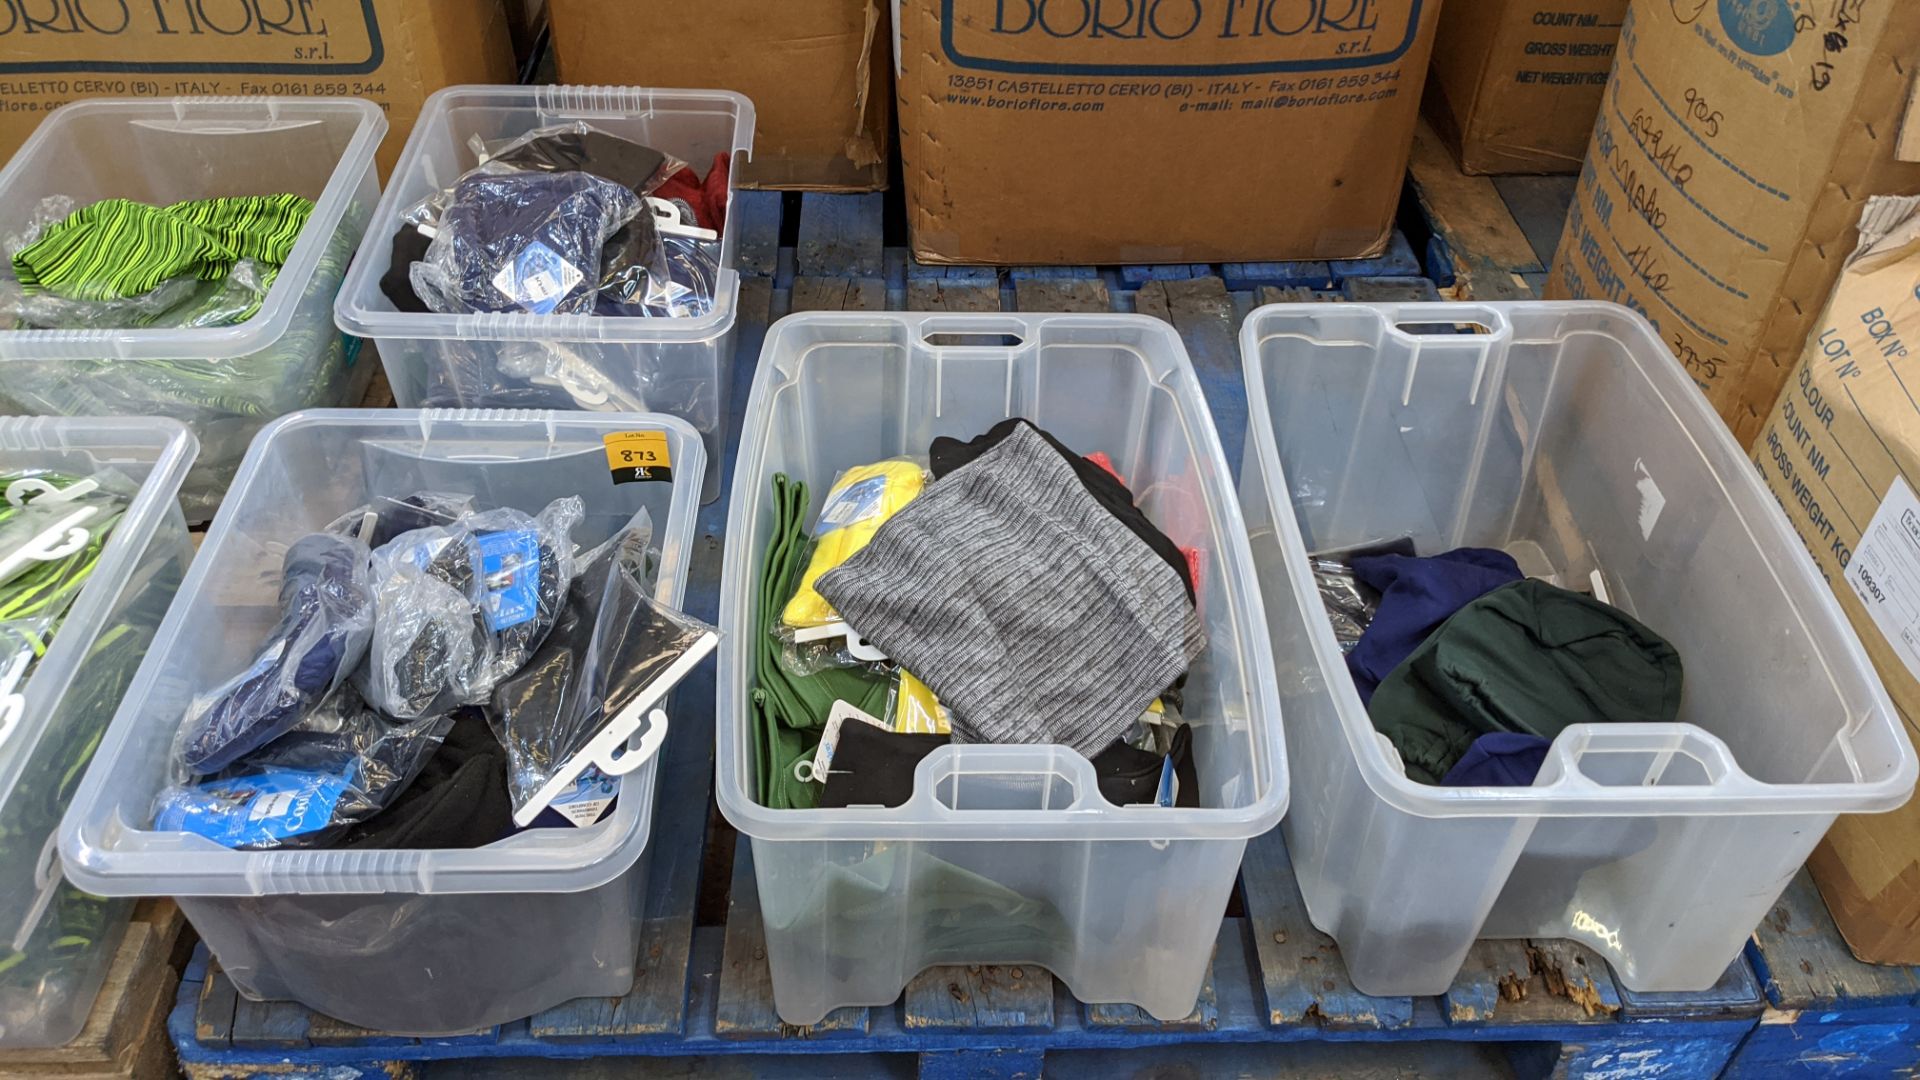 The contents of 4 crates of assorted hats, snoods & other products - crates excluded